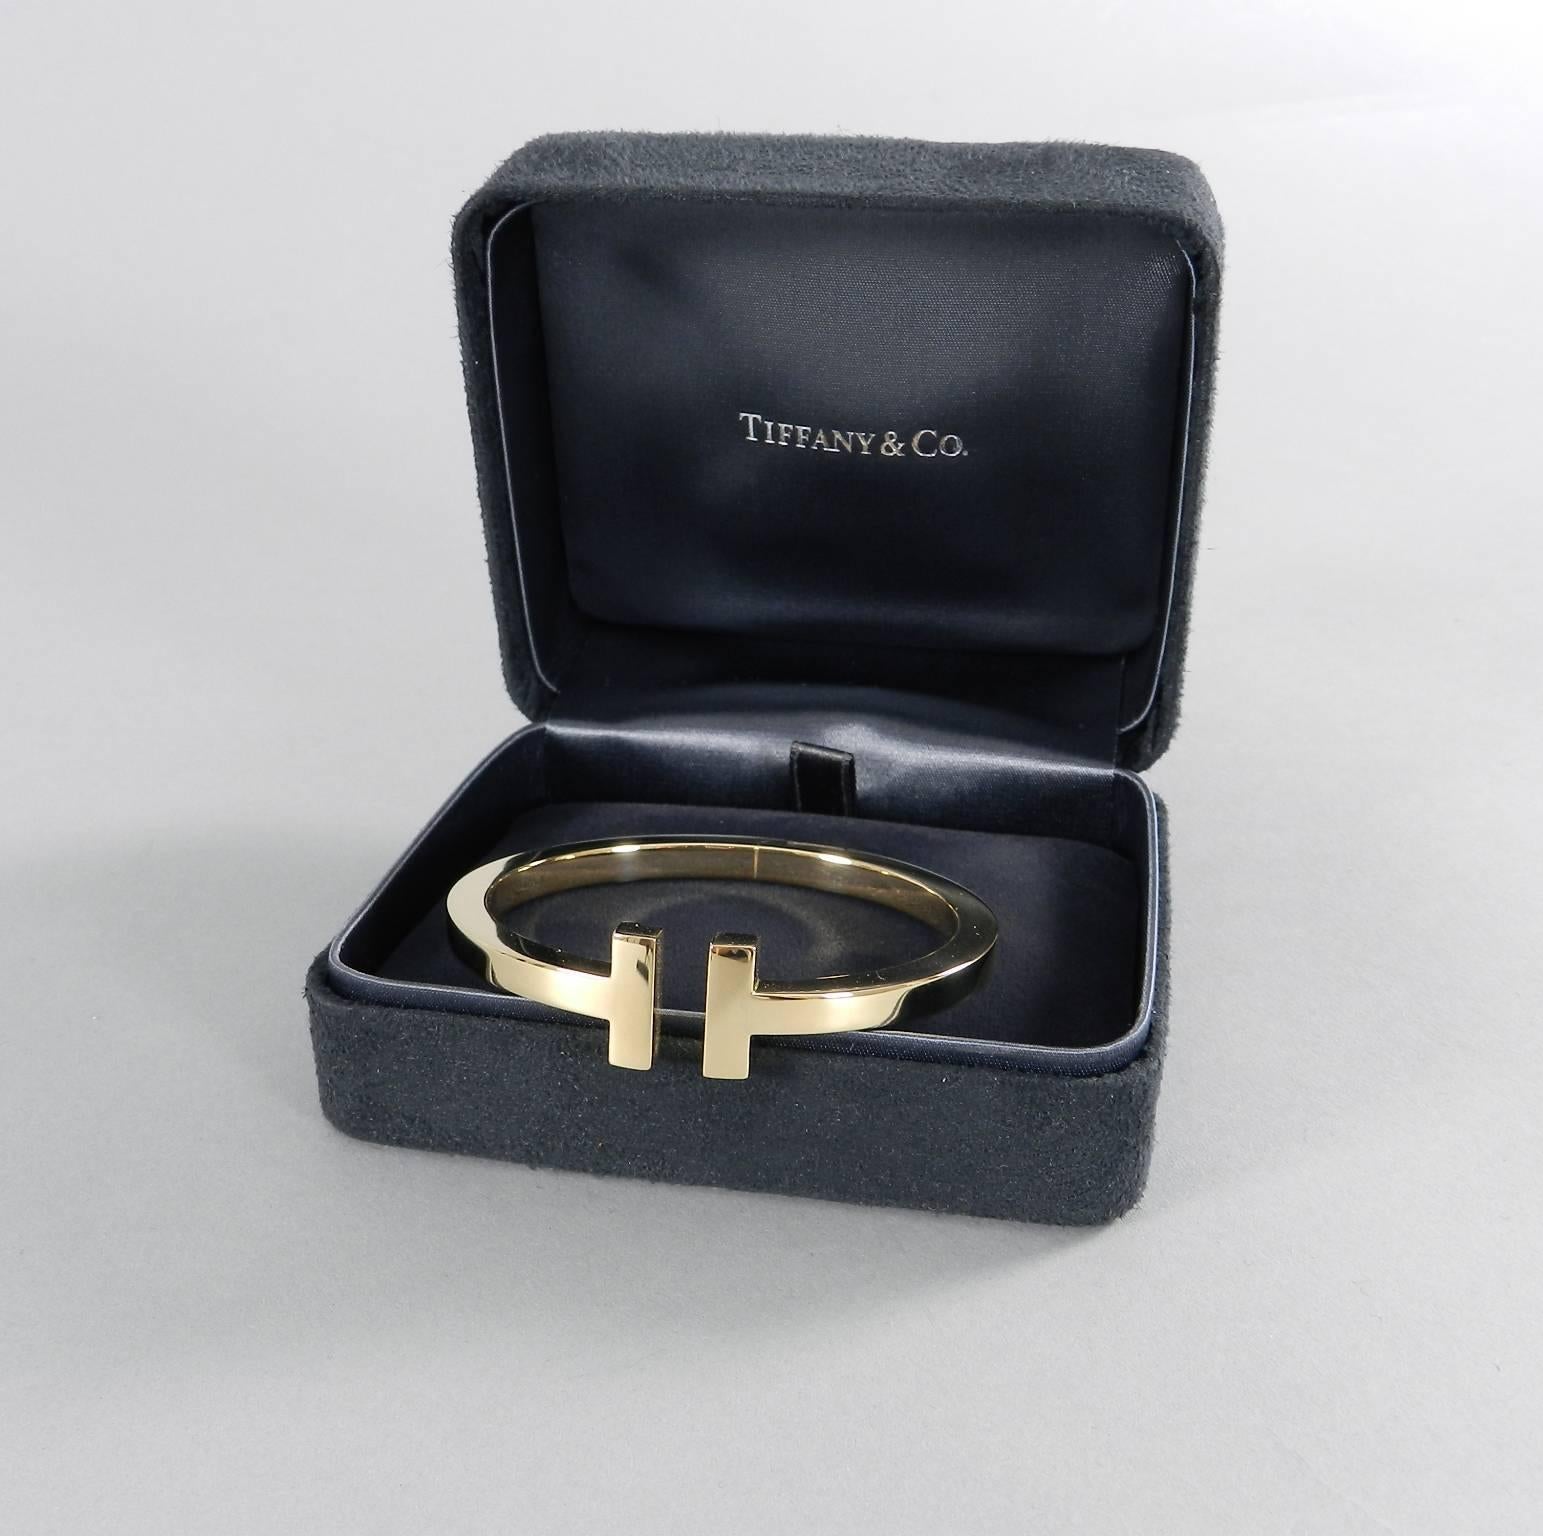 Tiffany & Co. 18k yellow gold medium T bracelet. Brand new in box. About 5/8